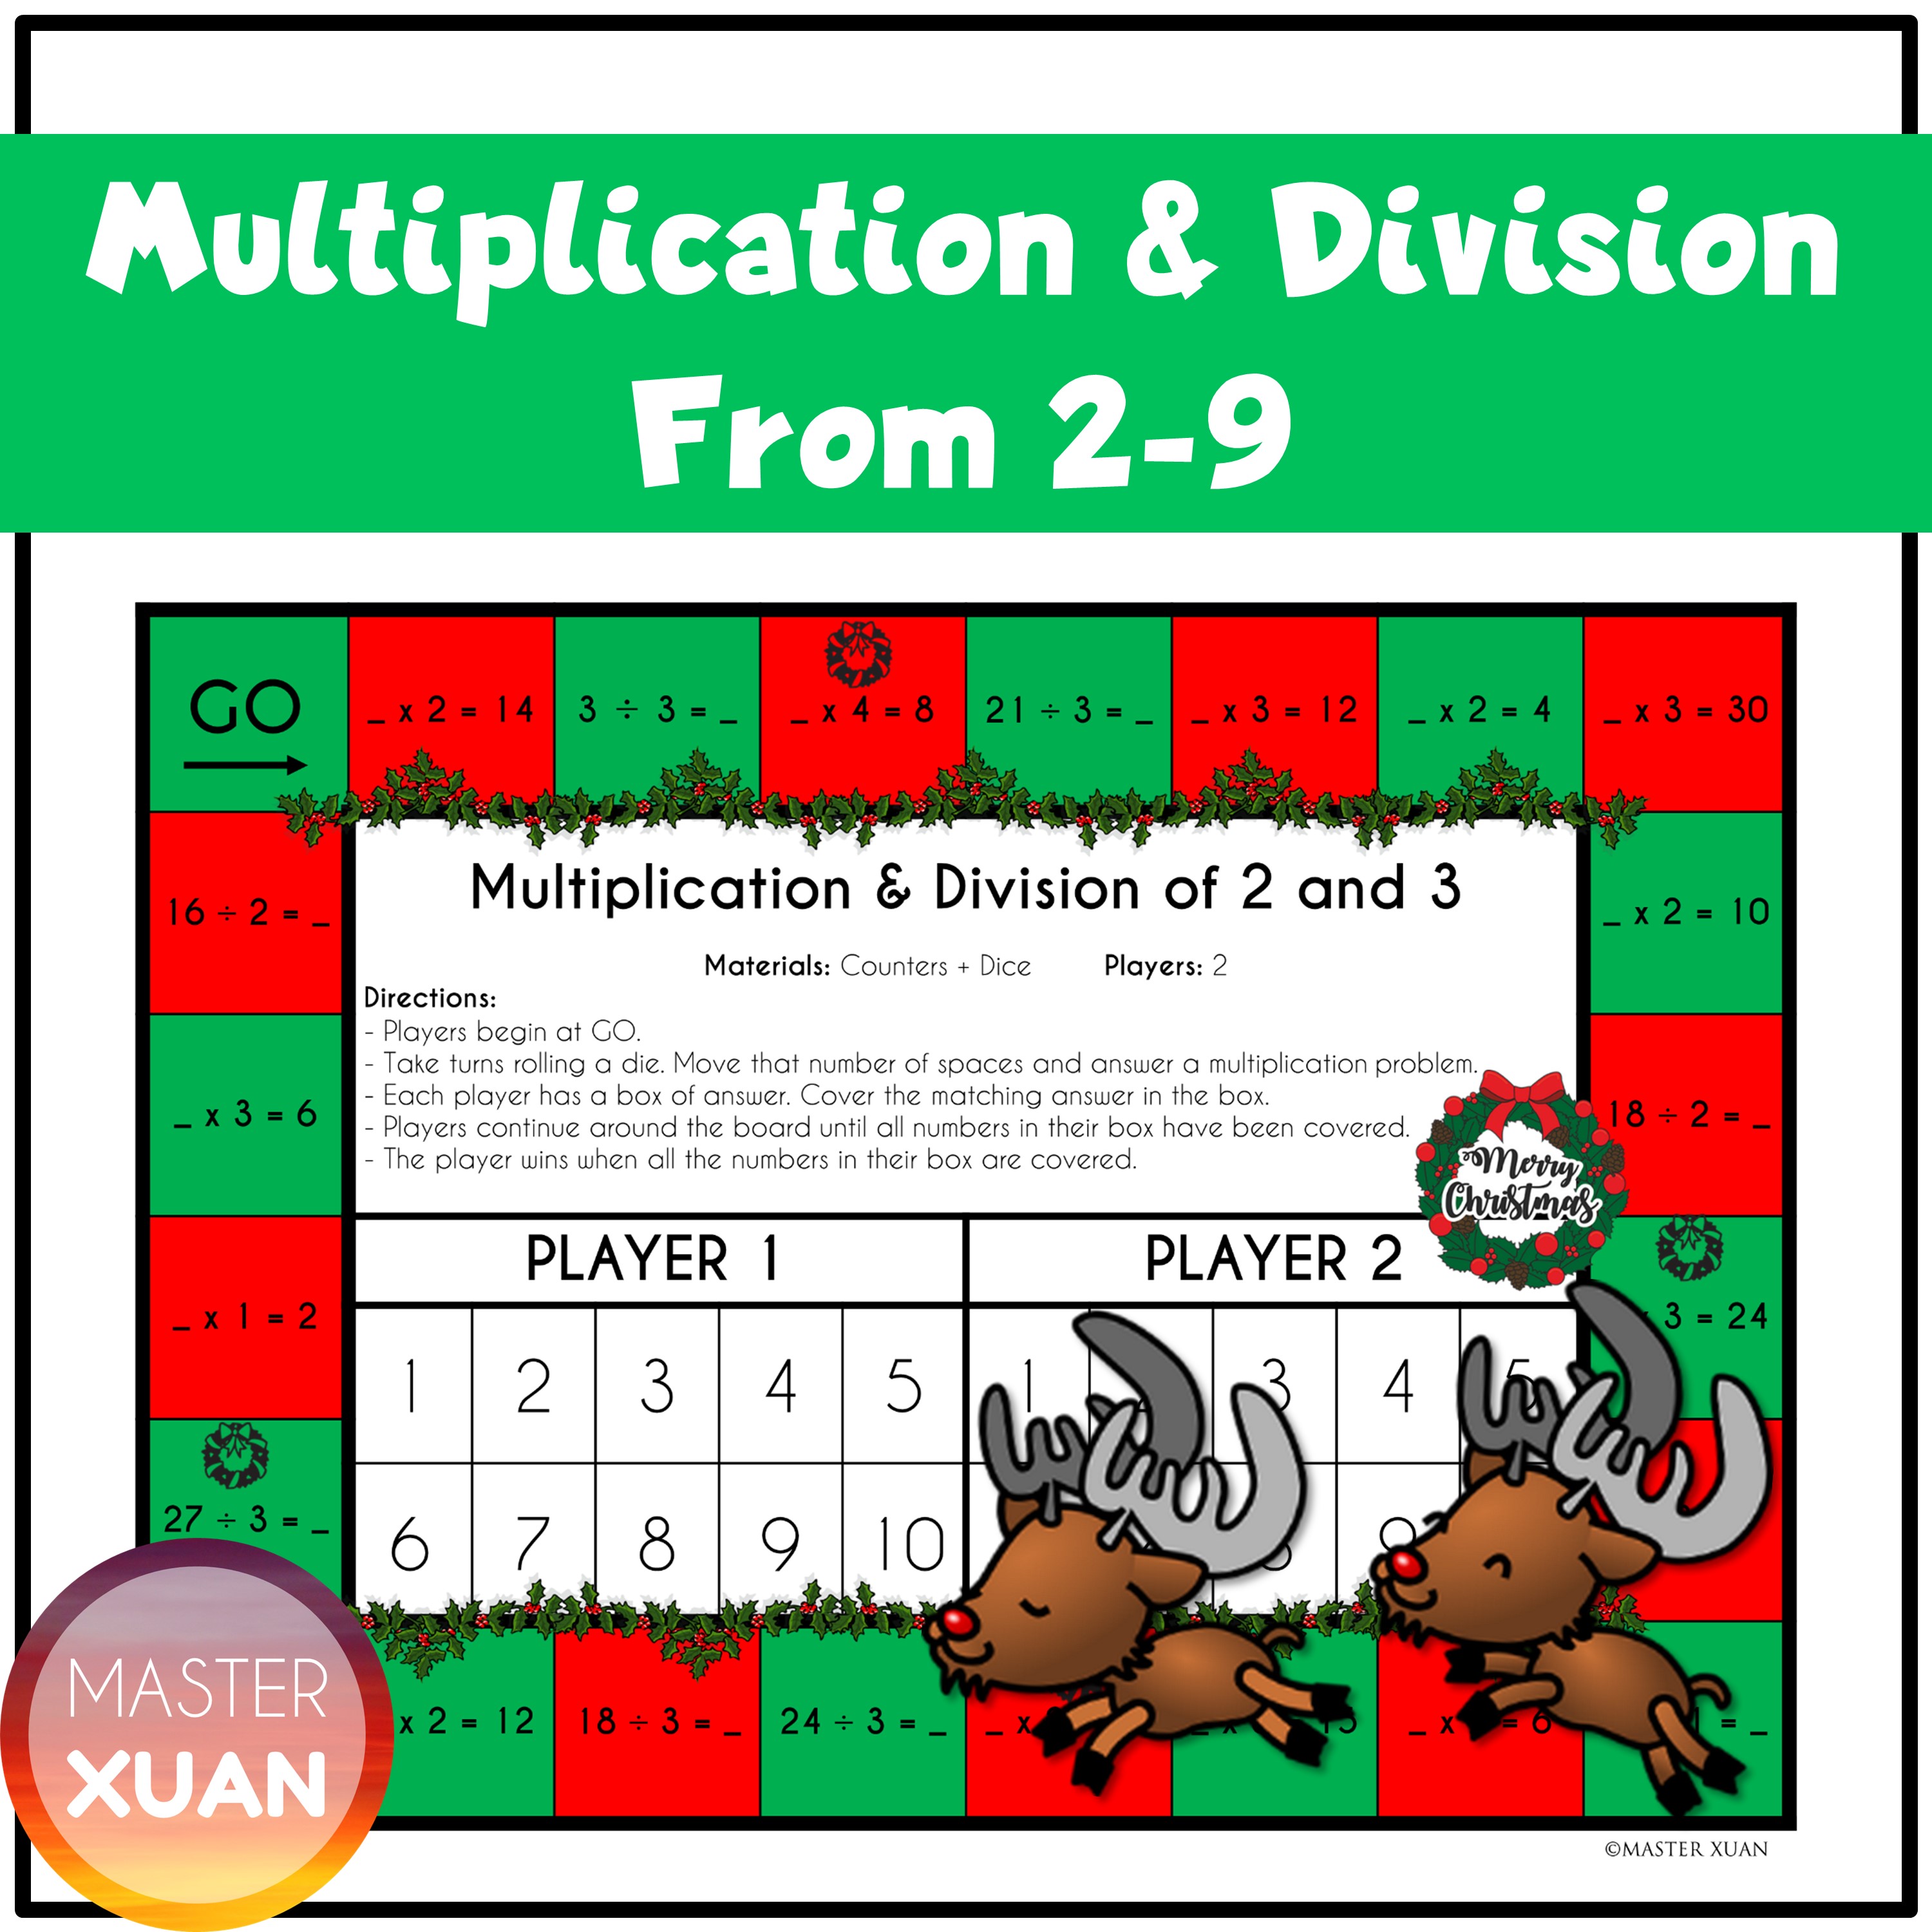 math games with multiplication and division - board game of multiplication and division of 2 and 3